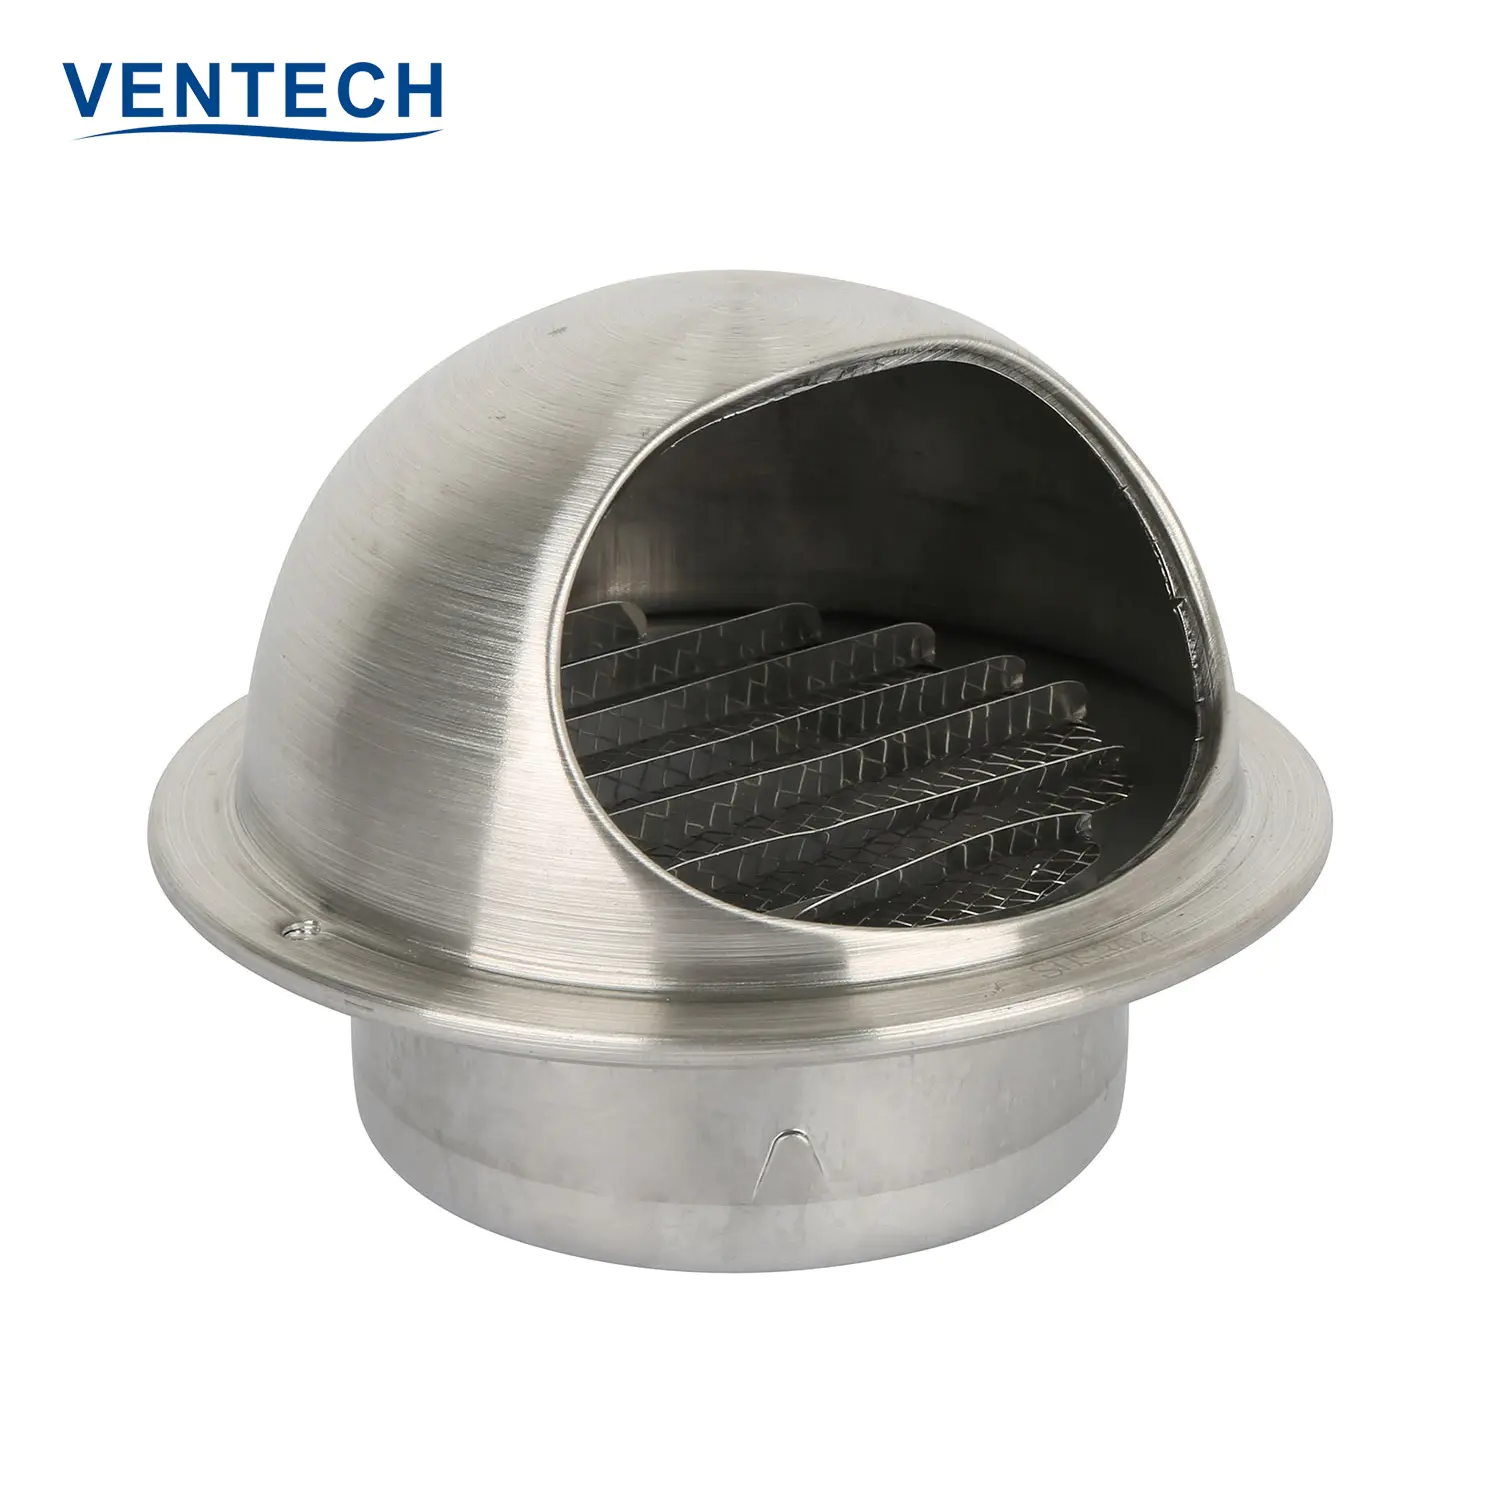 Hvac Aluminum Air Vent Cover Cap Stainless Steel Louver Vent Exhaust Air Ball Weather Louvers For Ventilation